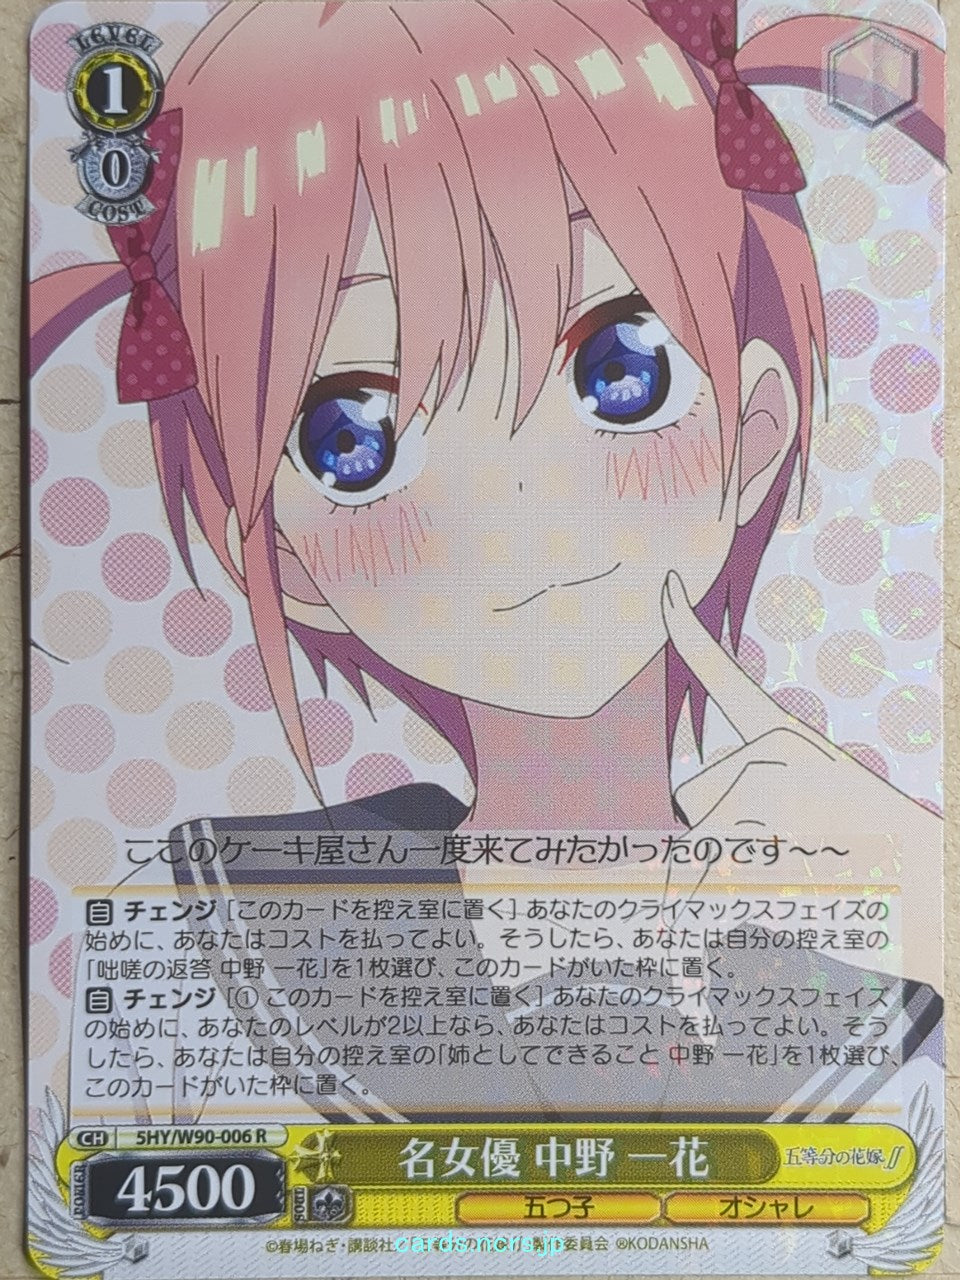 Weiss Schwarz The Quintessential Quintuplets -Ichika Nakano-   Trading Card 5HY/W90-006R